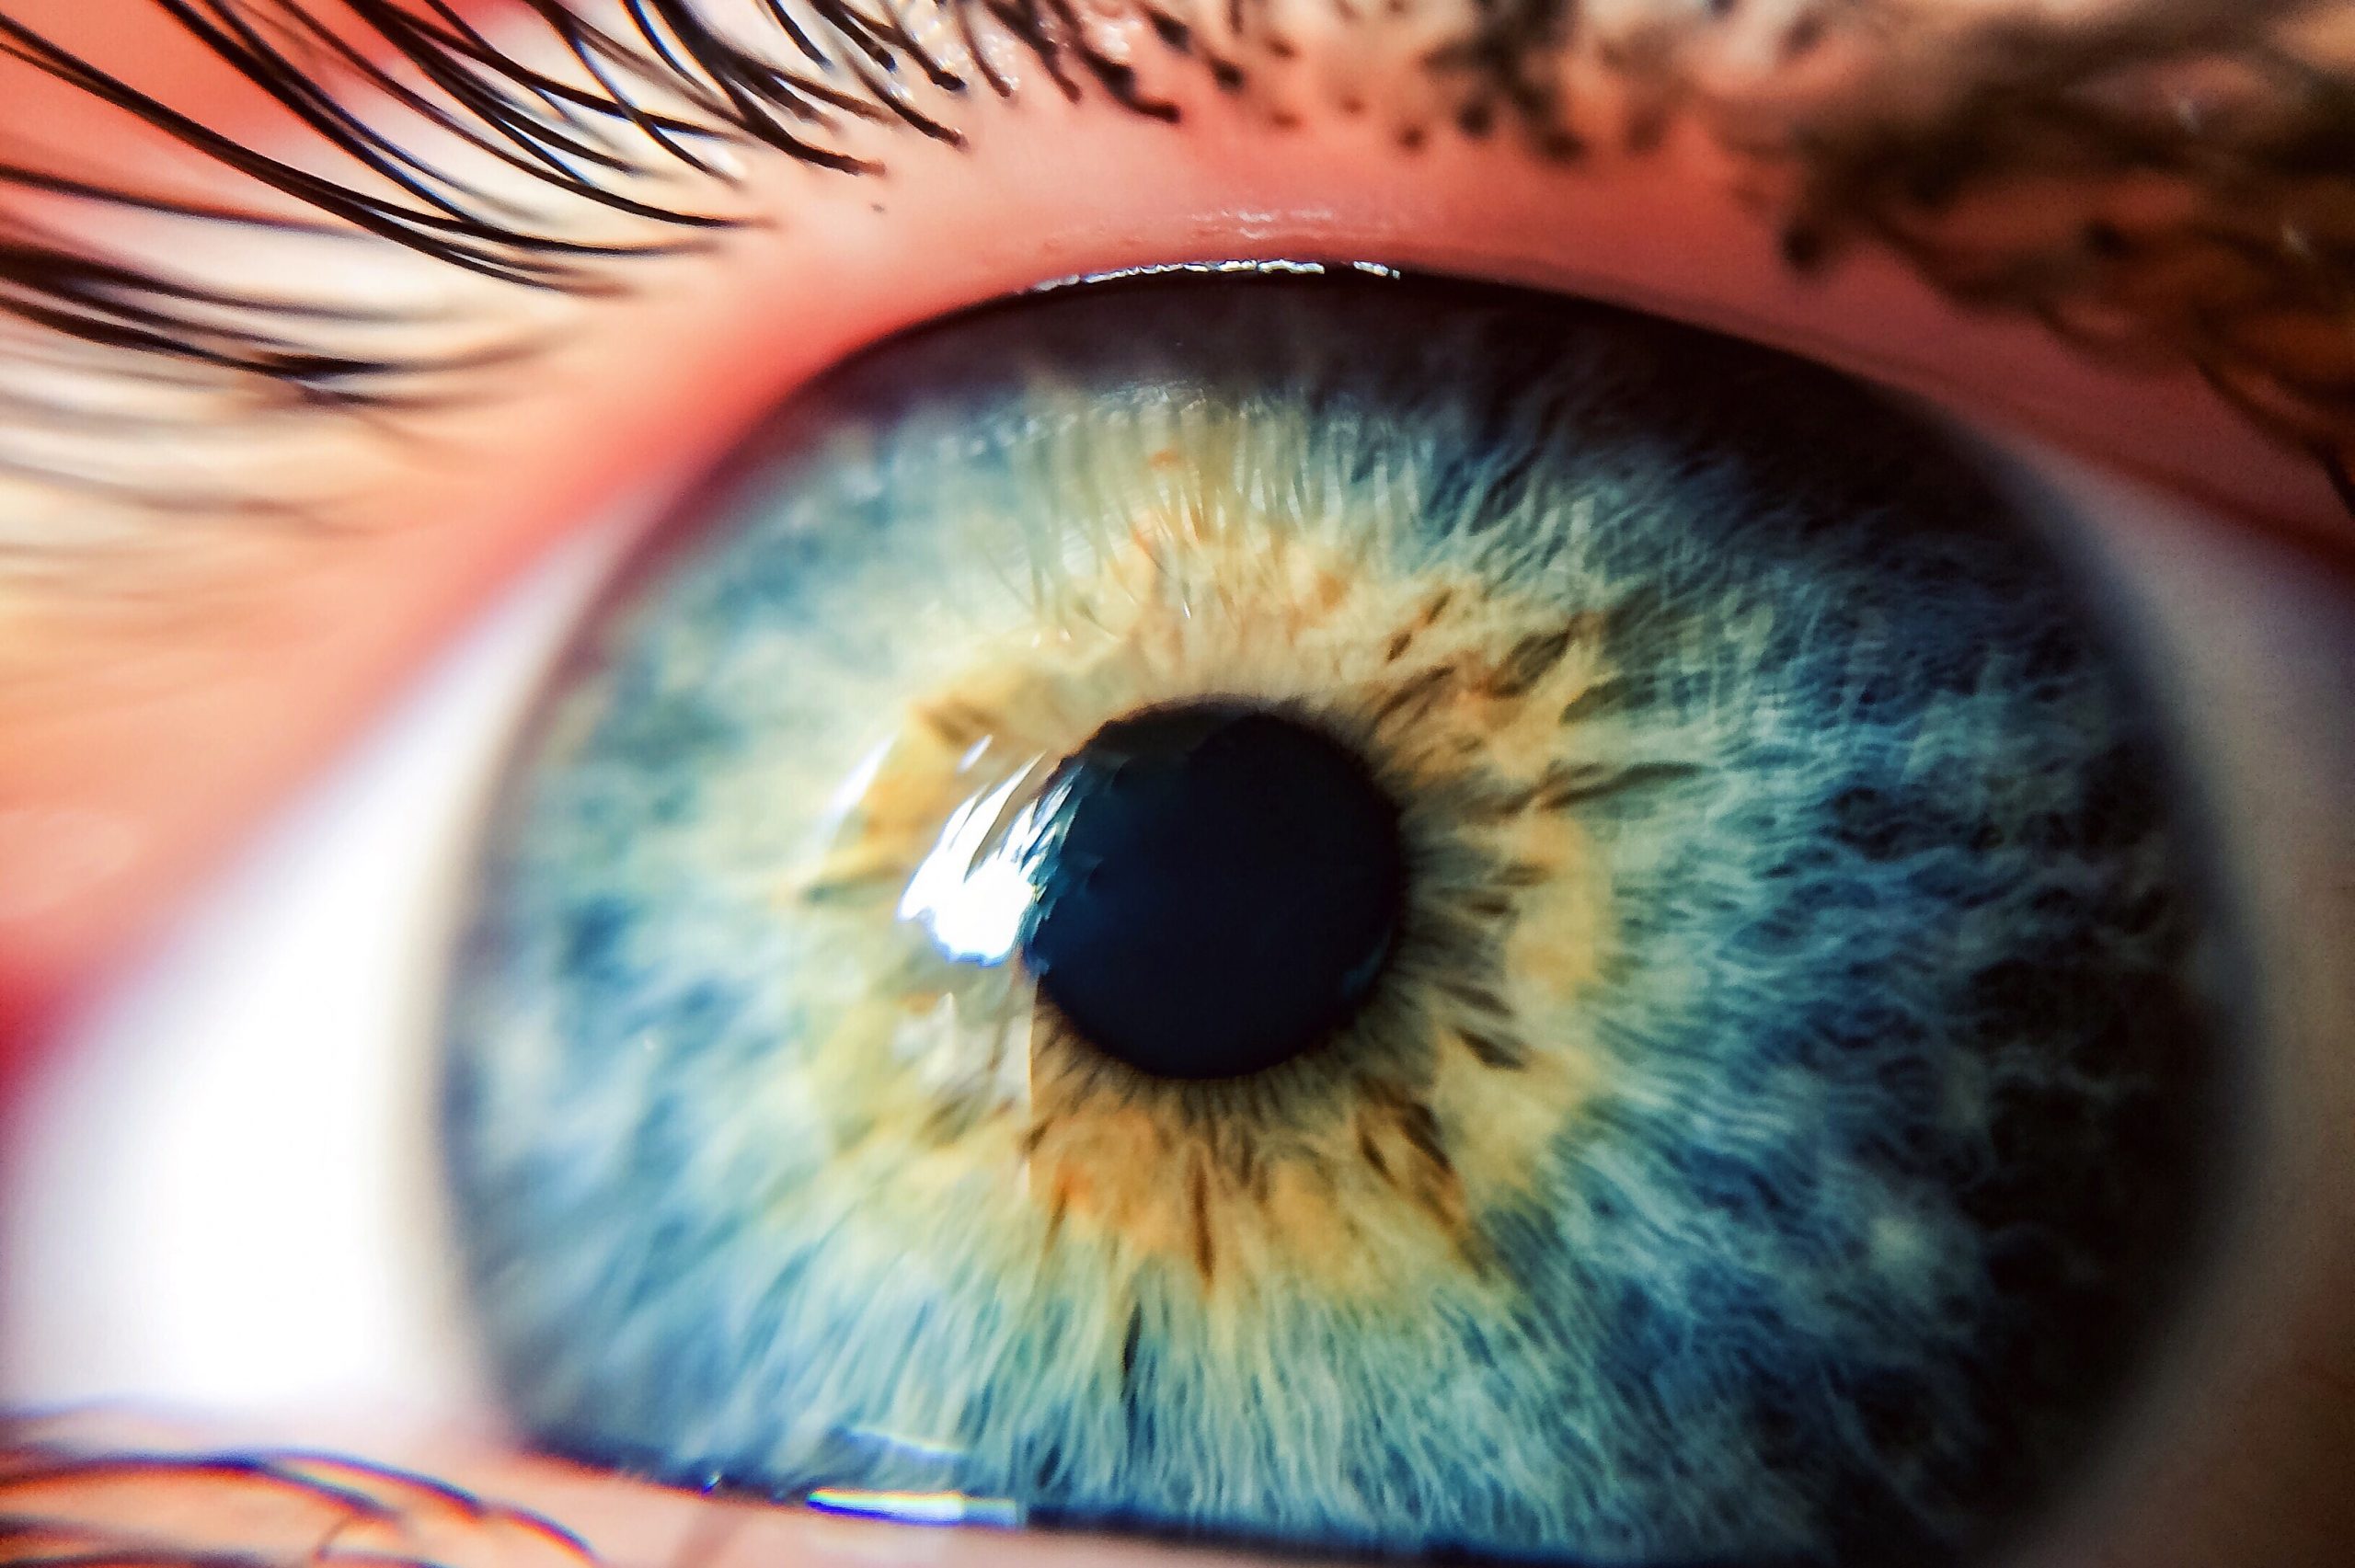 How many pixels? 7 surprising facts you may not know about your eyes